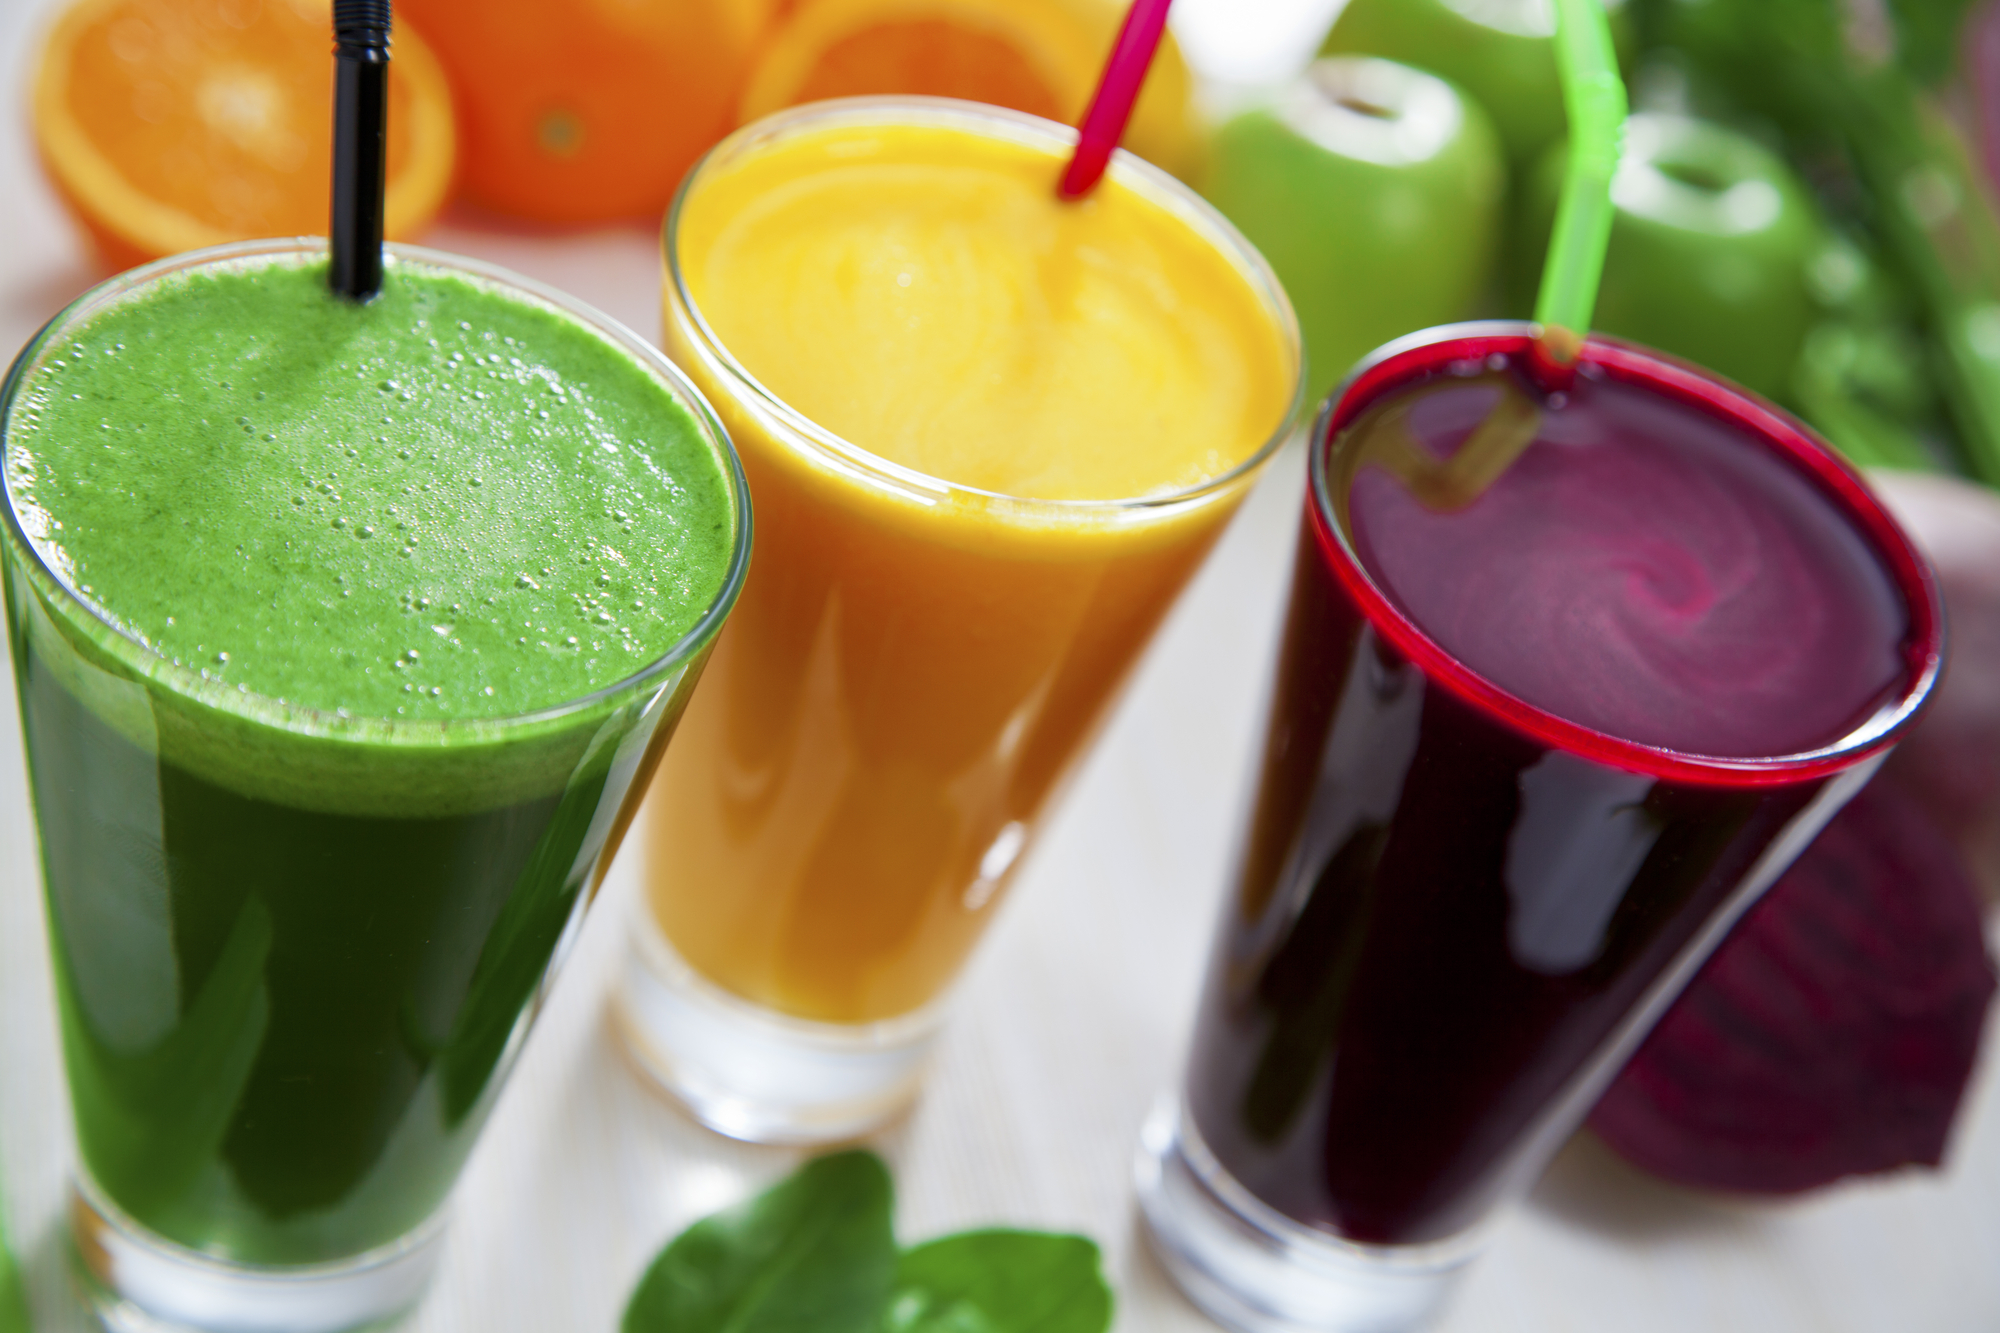 Juicing Recipes Best Juices for a Cleanse